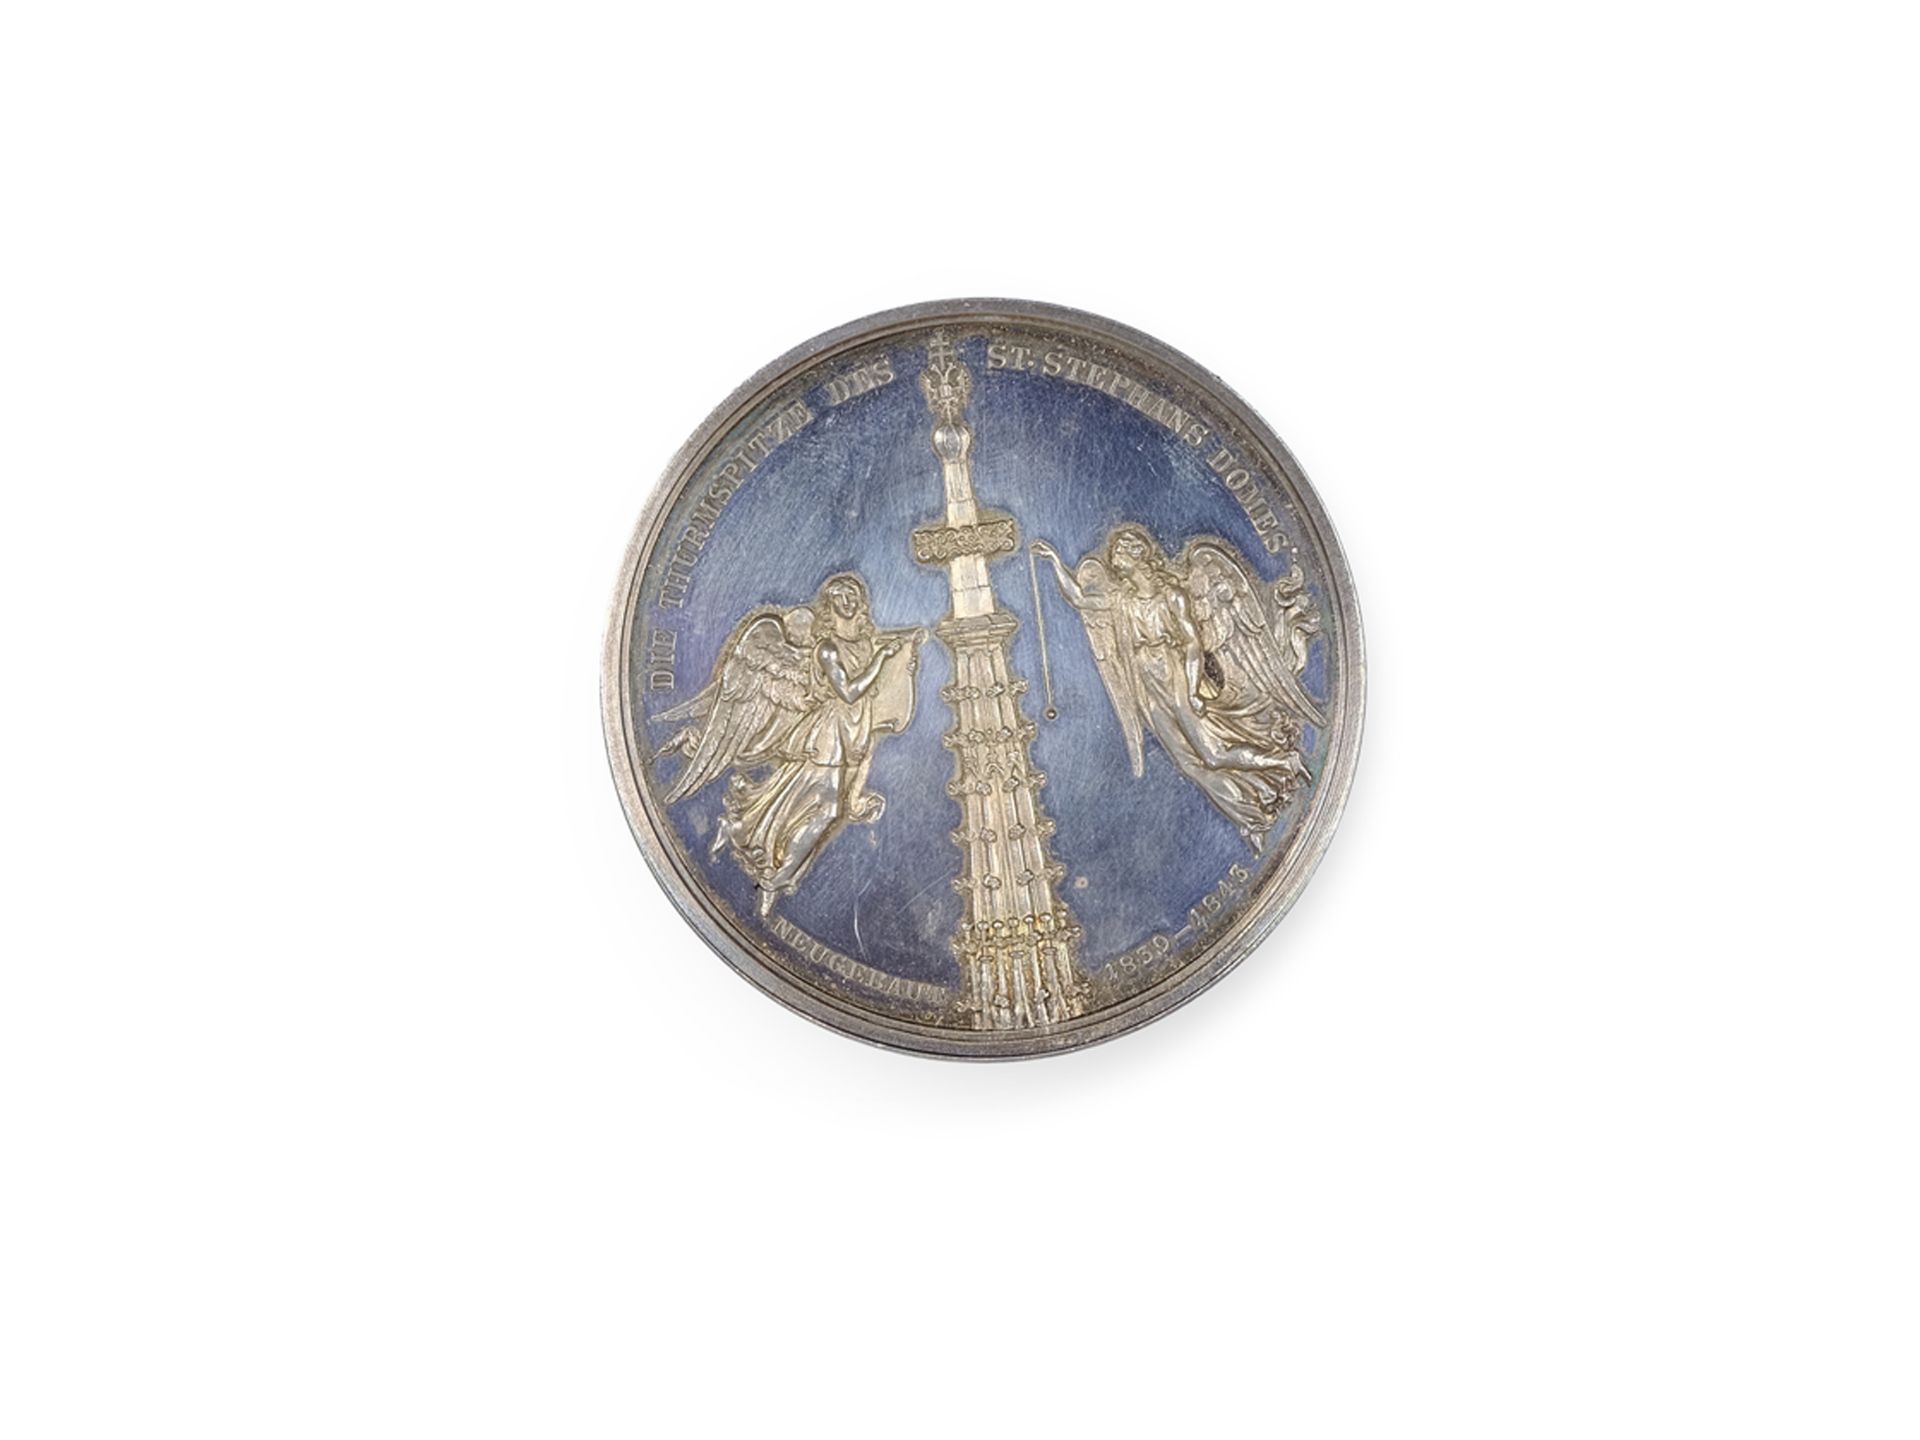 Medal of Ferdinand I, Emperor of Austria, reverse: The spire of St Stephen's Cathedral, 1843 - Image 3 of 4